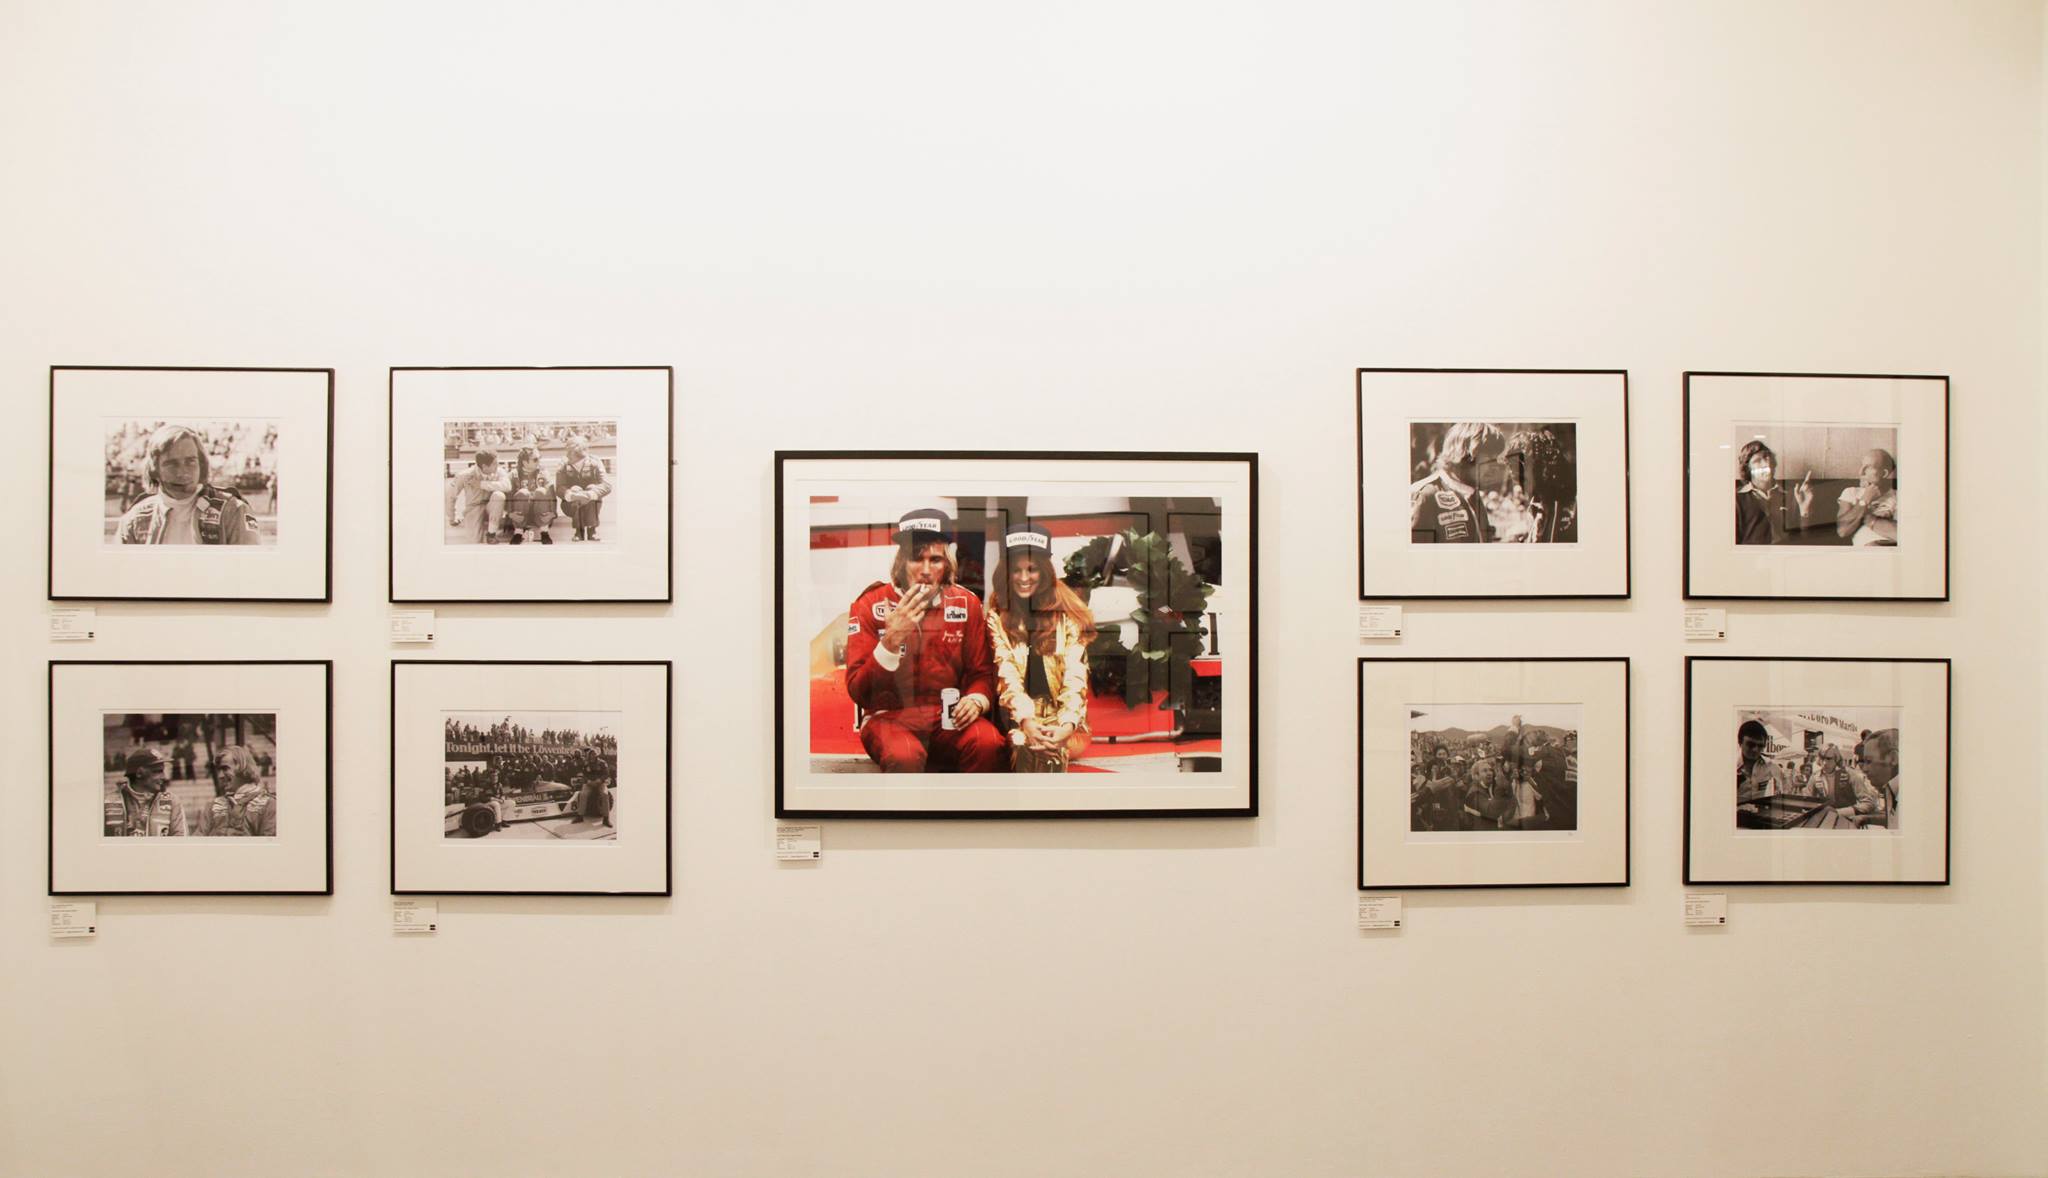 ‘James Hunt: girls, beer and victory' runs from 11 February to 03 April 2016 at the Proud Gallery in Chelsea and features some of the most iconic photos of Hunt on and off the track.